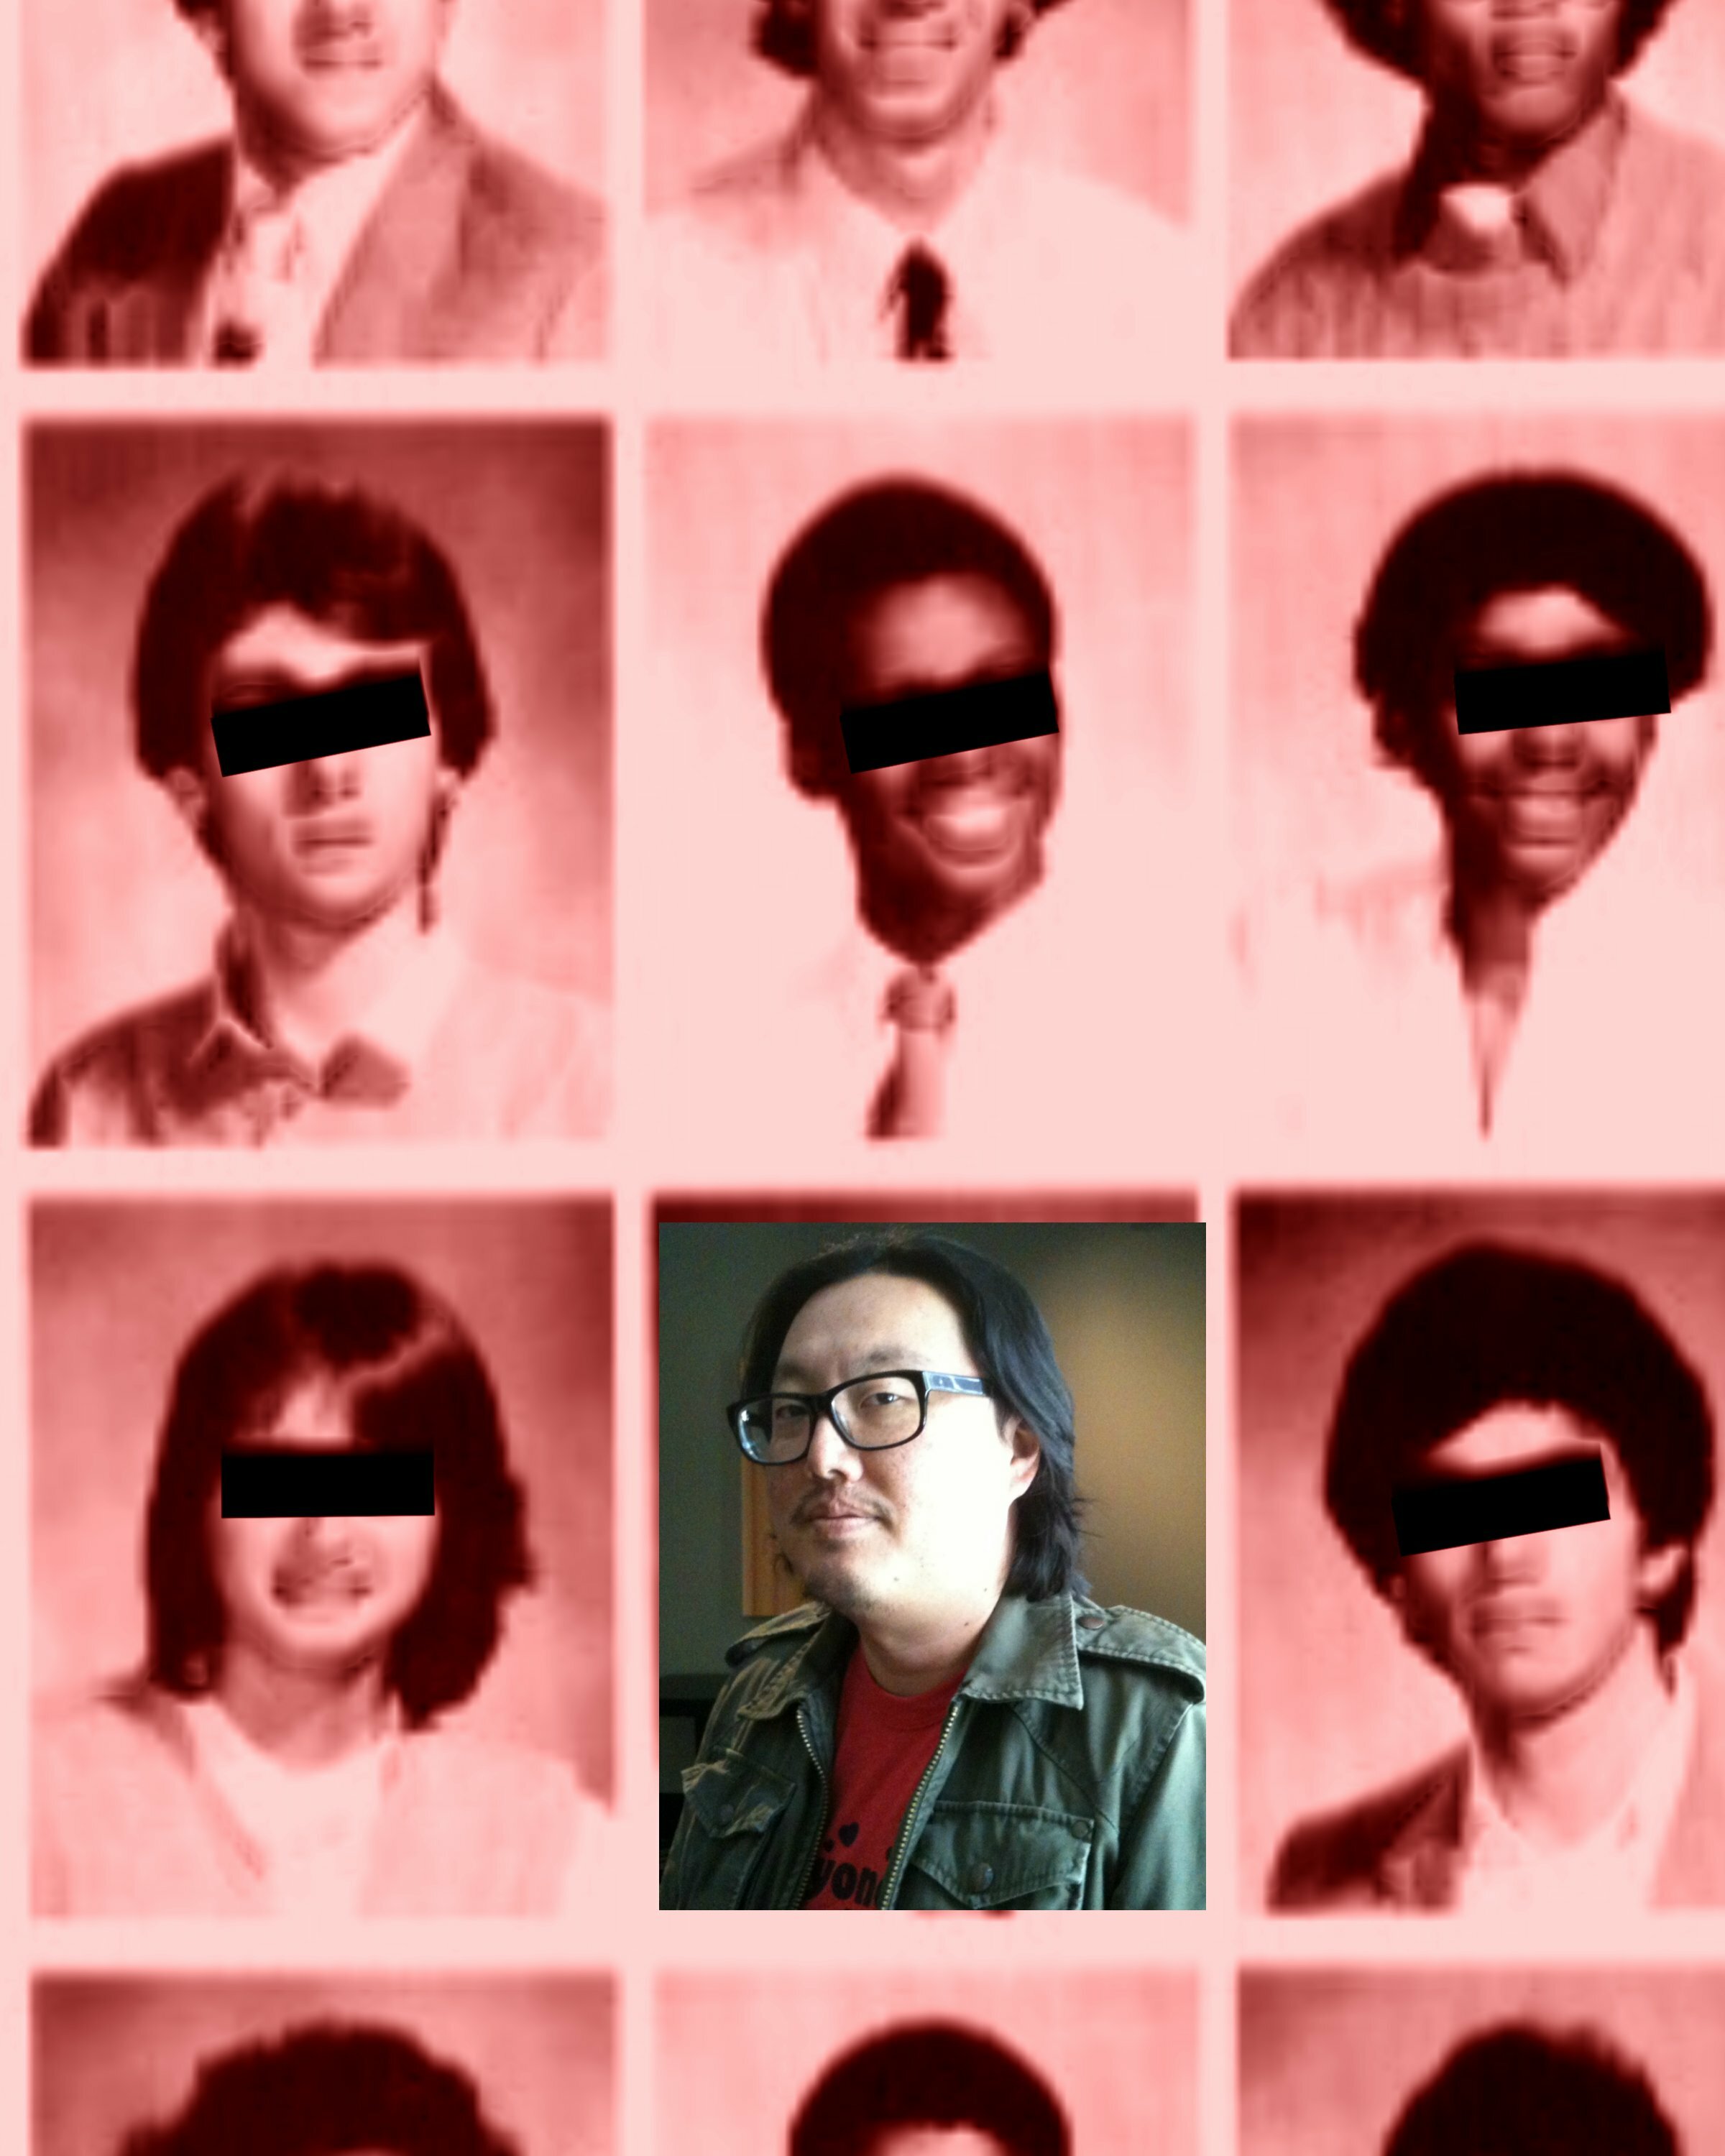 Most Likely to Direct a Meta-High-School Movie: Director Joseph Kahn. Photo/collage by Tony Kay.